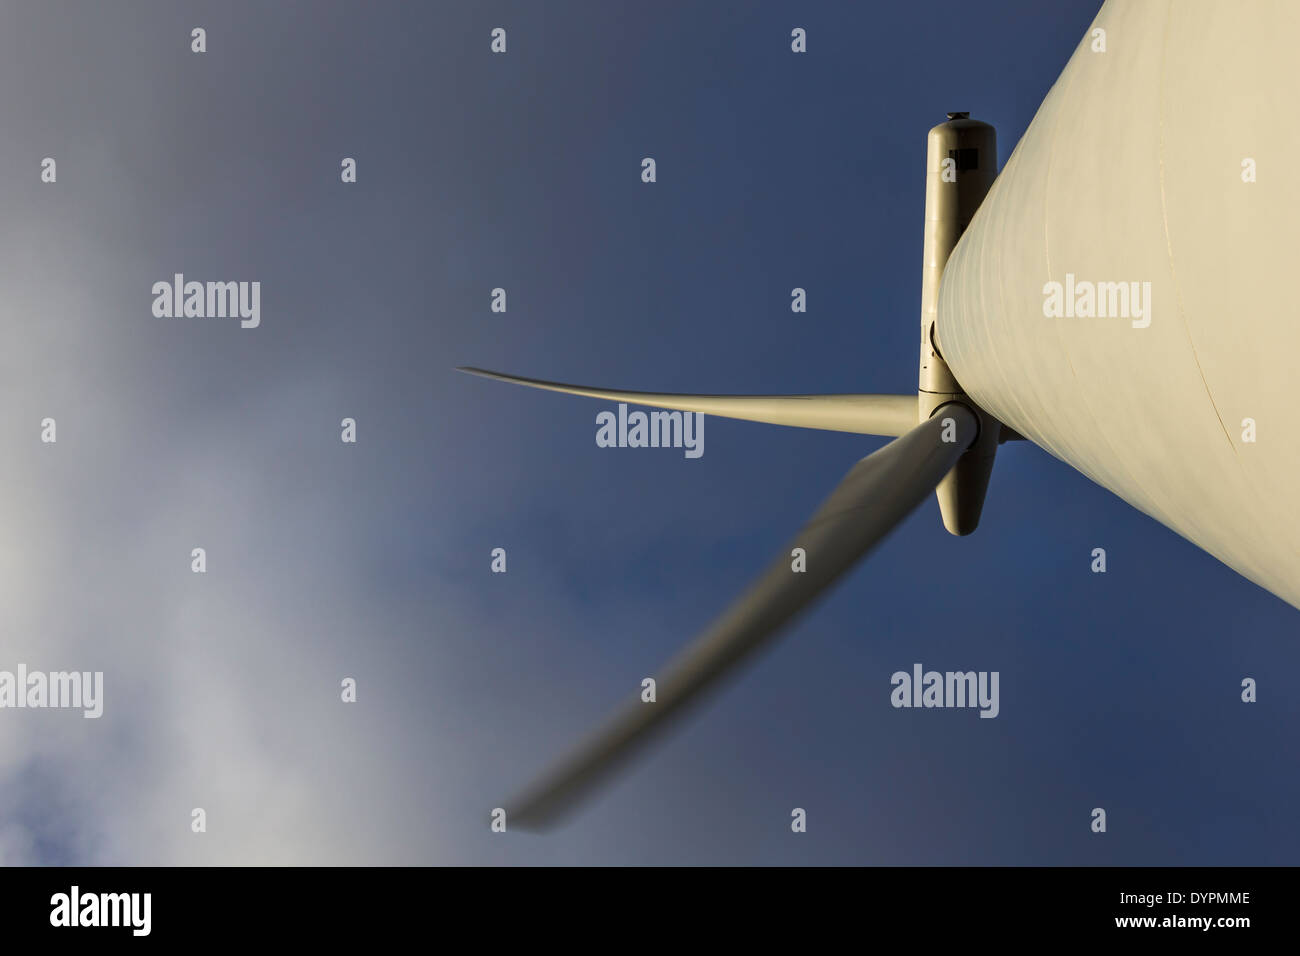 Wind turbine Blades from directly underneath showing movement with clouds and blue sky. Stock Photo